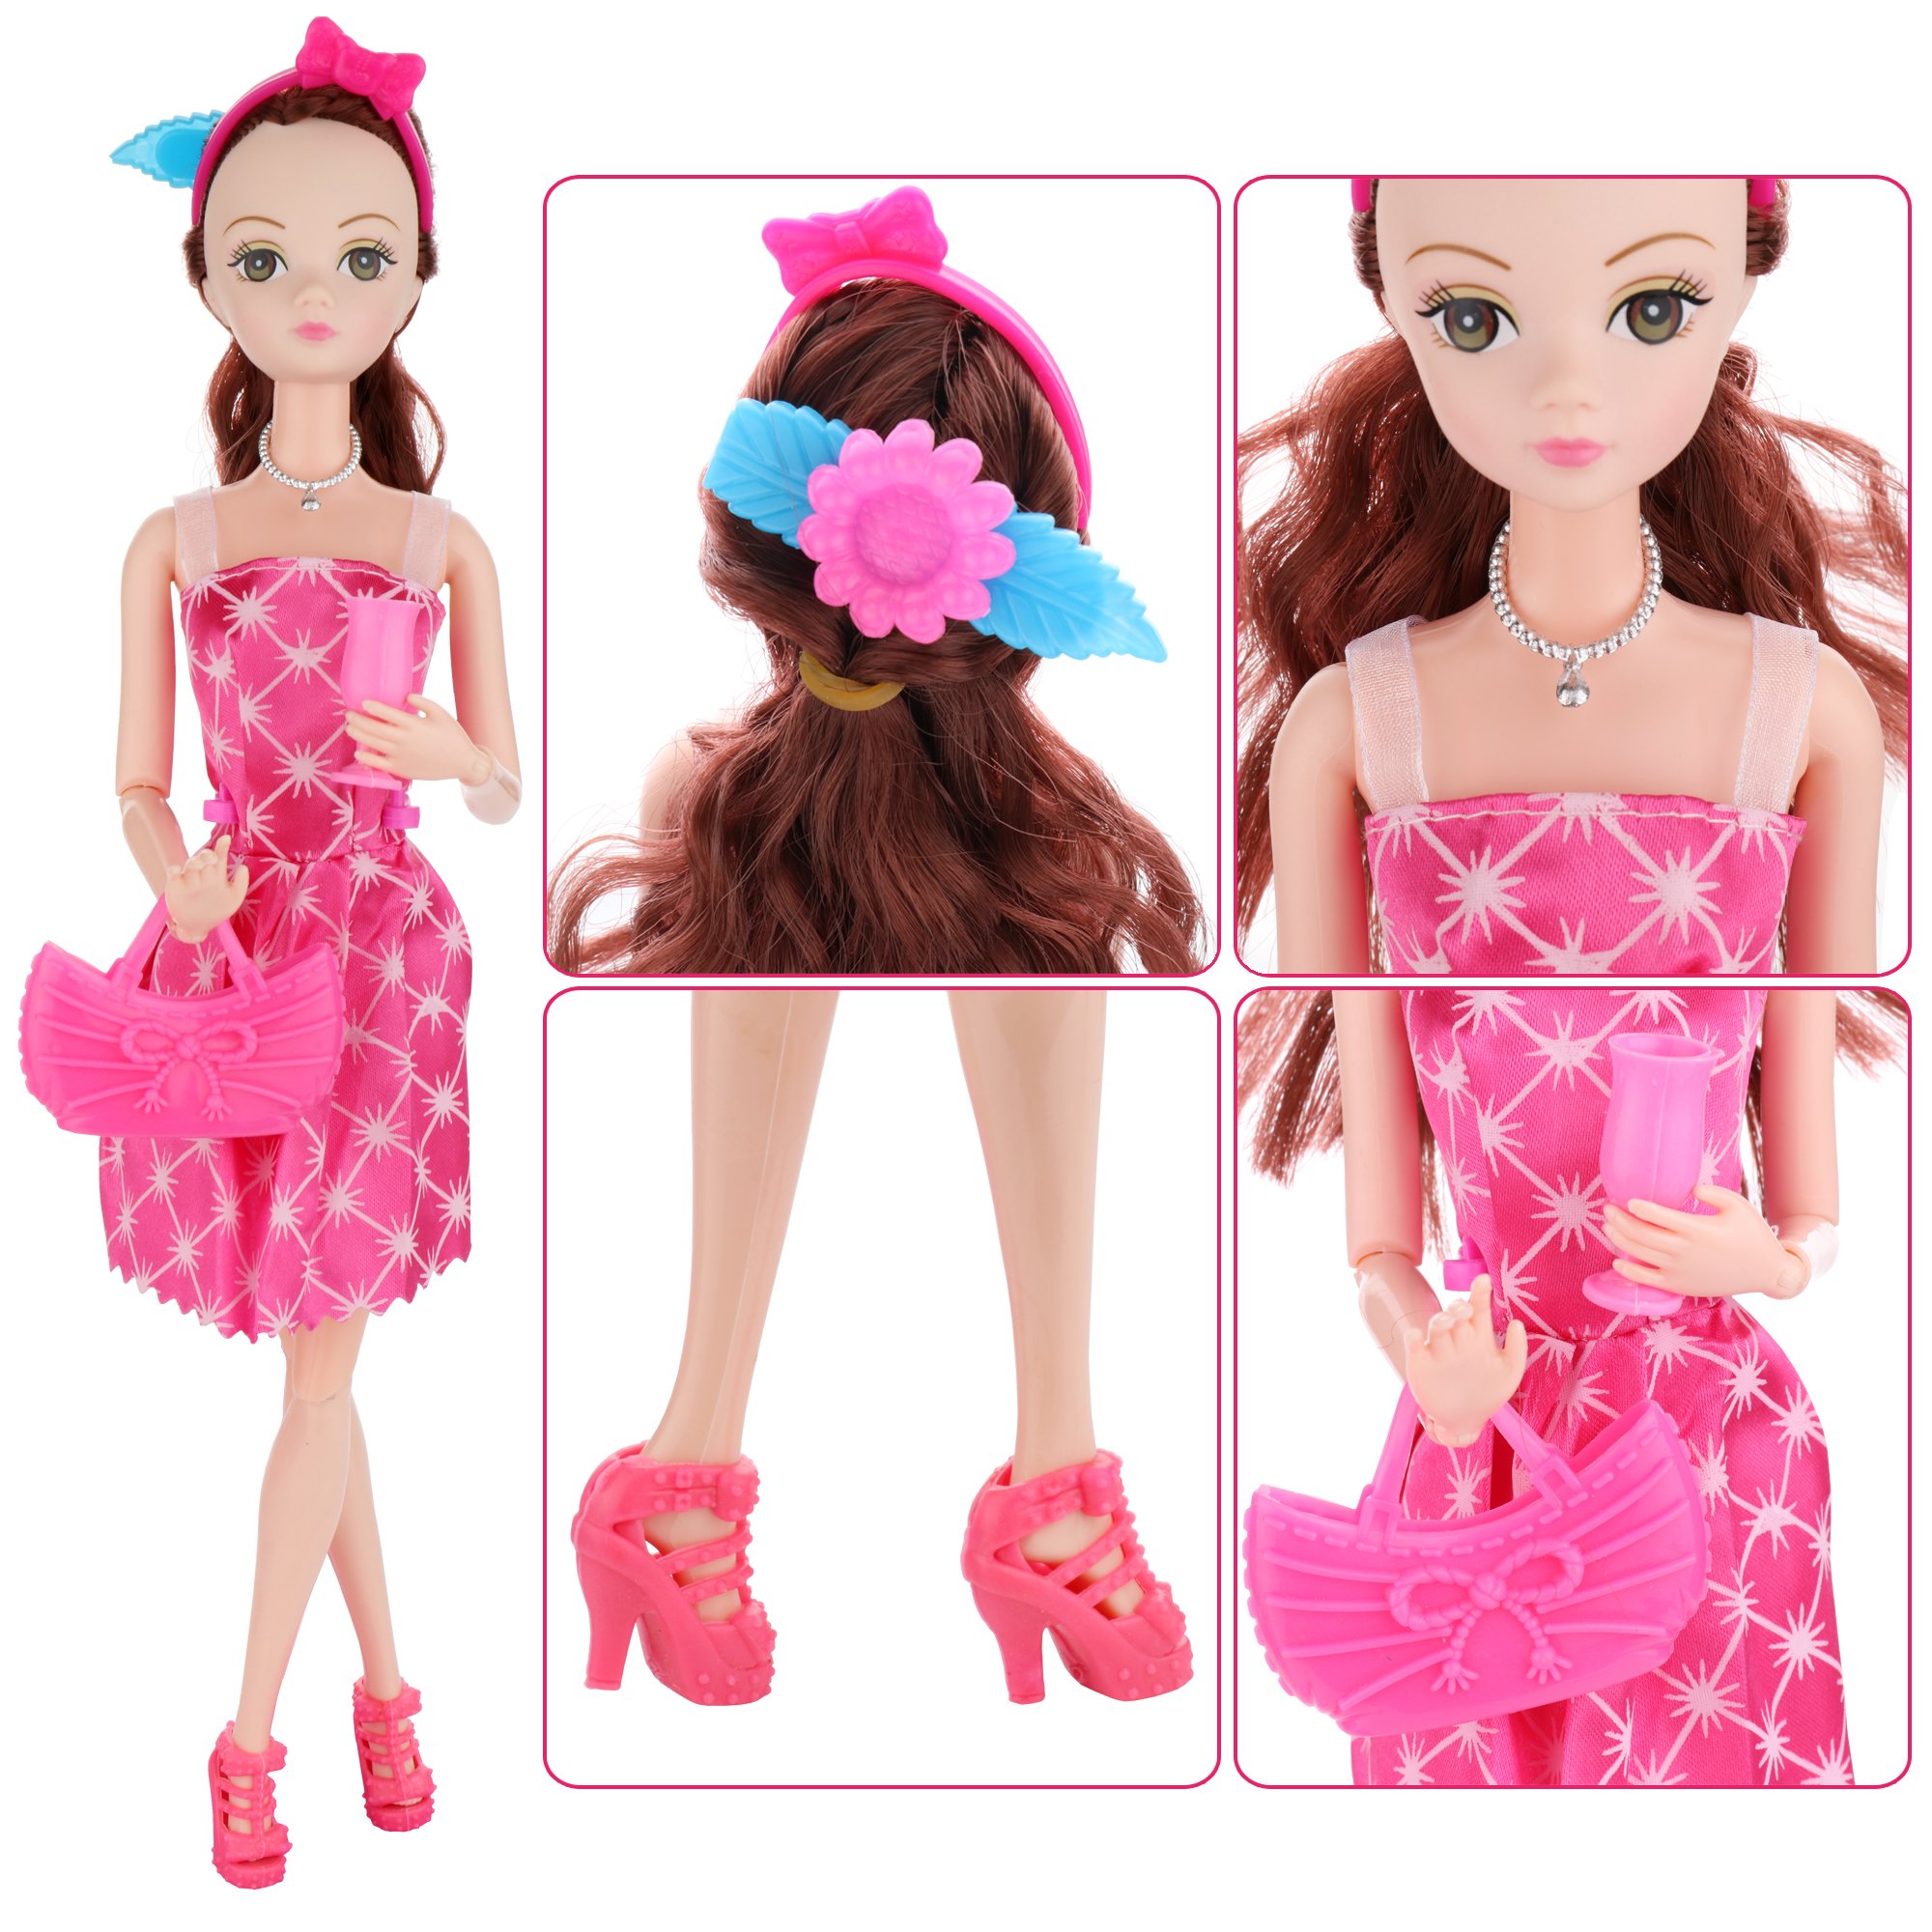 SOTOGO 106 Pieces Doll Clothes and Accessories for 11.5 Inch Girl Doll Include 15 Sets Doll Outfits Fashion Doll Dresses Party Doll Gowns, 90 Pieces Doll Accessories and Storage Bag